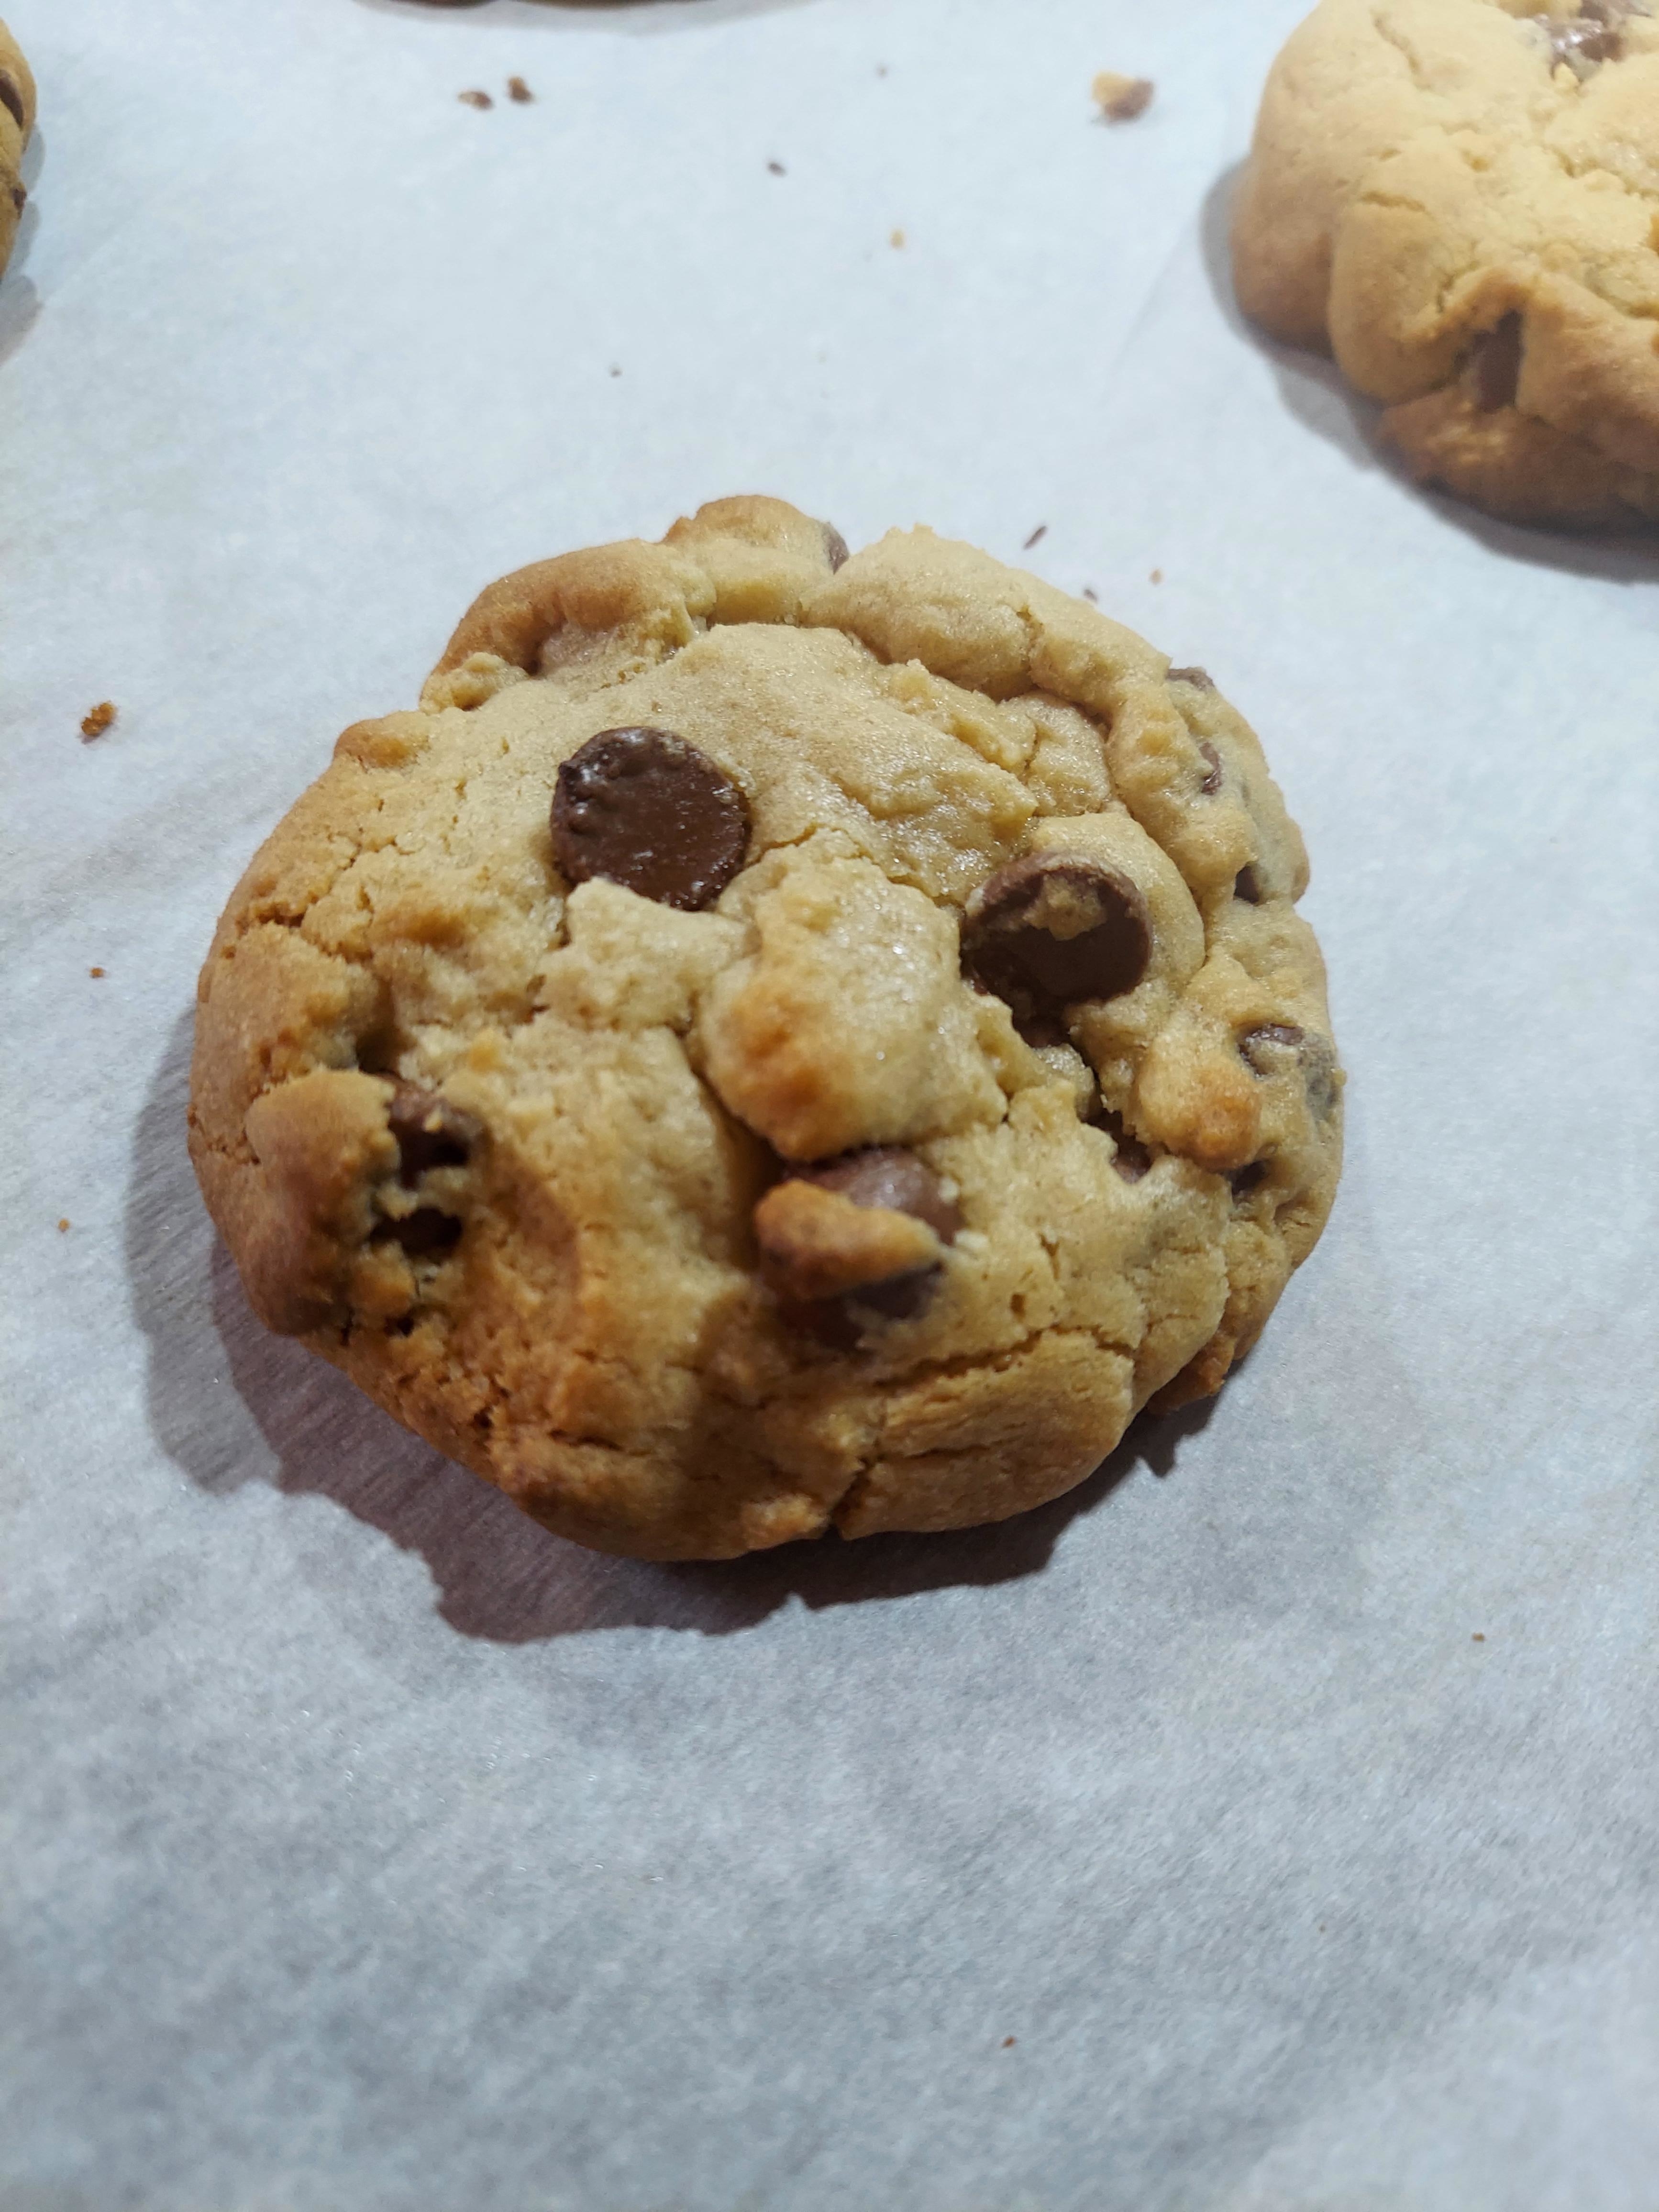 A freshly baked chocolate chip cookie on parchment paper